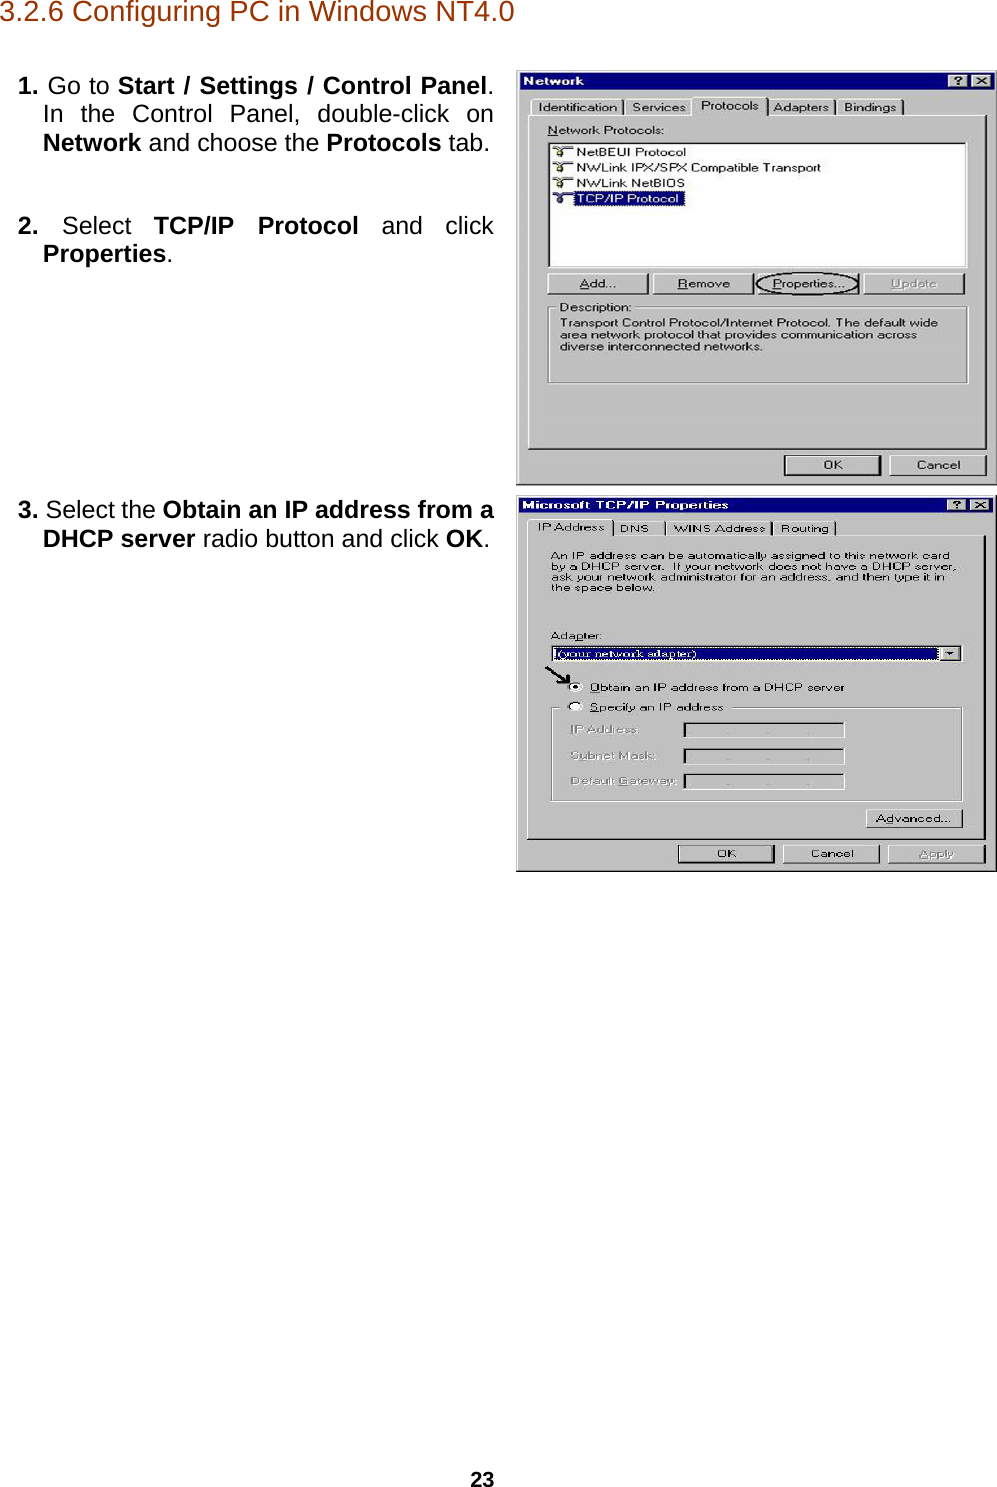 23 3.2.6 Configuring PC in Windows NT4.0  1. Go to Start / Settings / Control Panel. In the Control Panel, double-click on Network and choose the Protocols tab. 2.  Select  TCP/IP Protocol and click Properties.  3. Select the Obtain an IP address from a DHCP server radio button and click OK.         